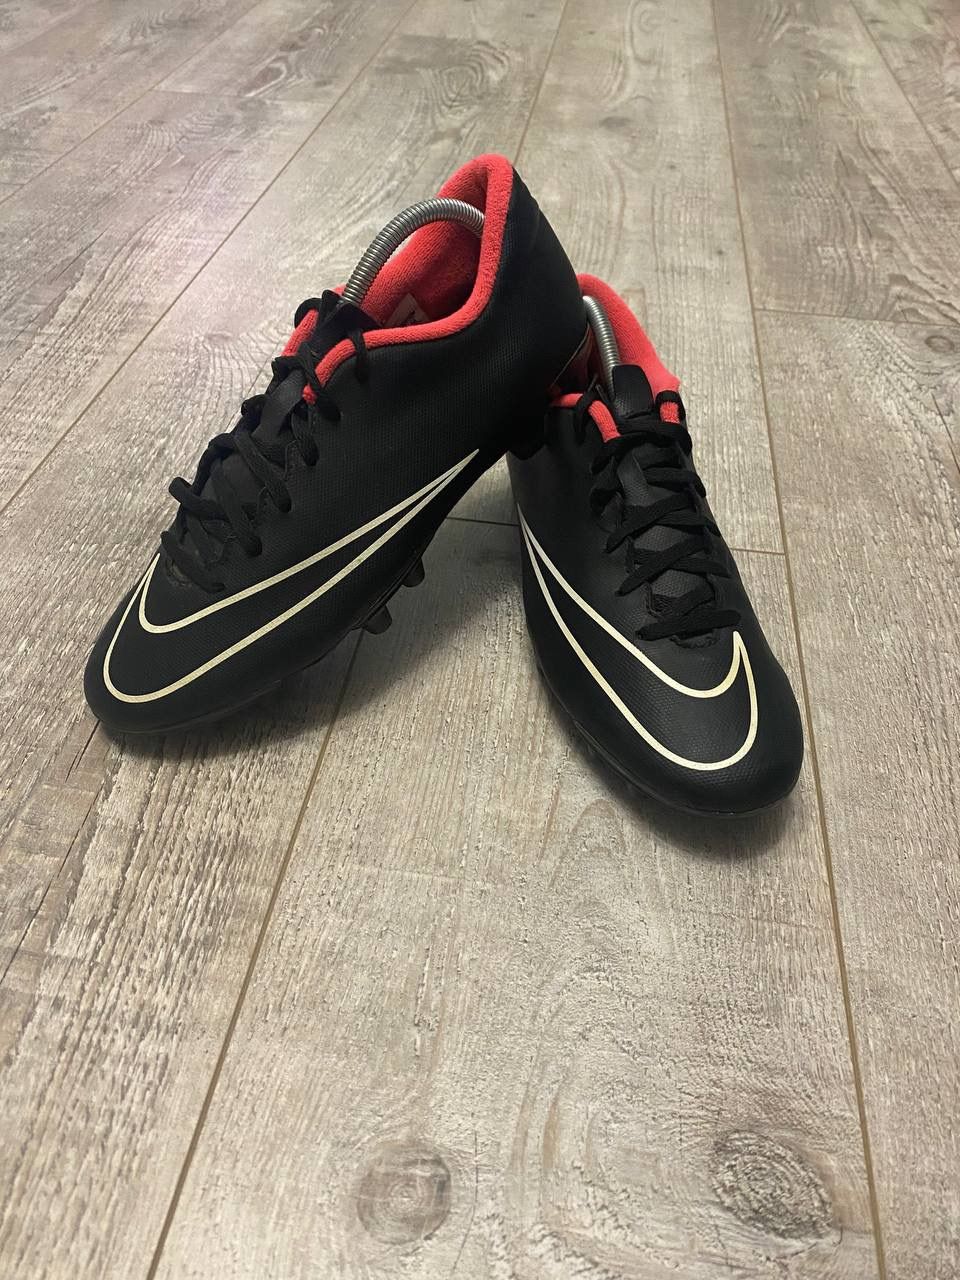 Pre-owned Nike X Soccer Jersey Nike Mercurial Soccer Football Shoes In Black